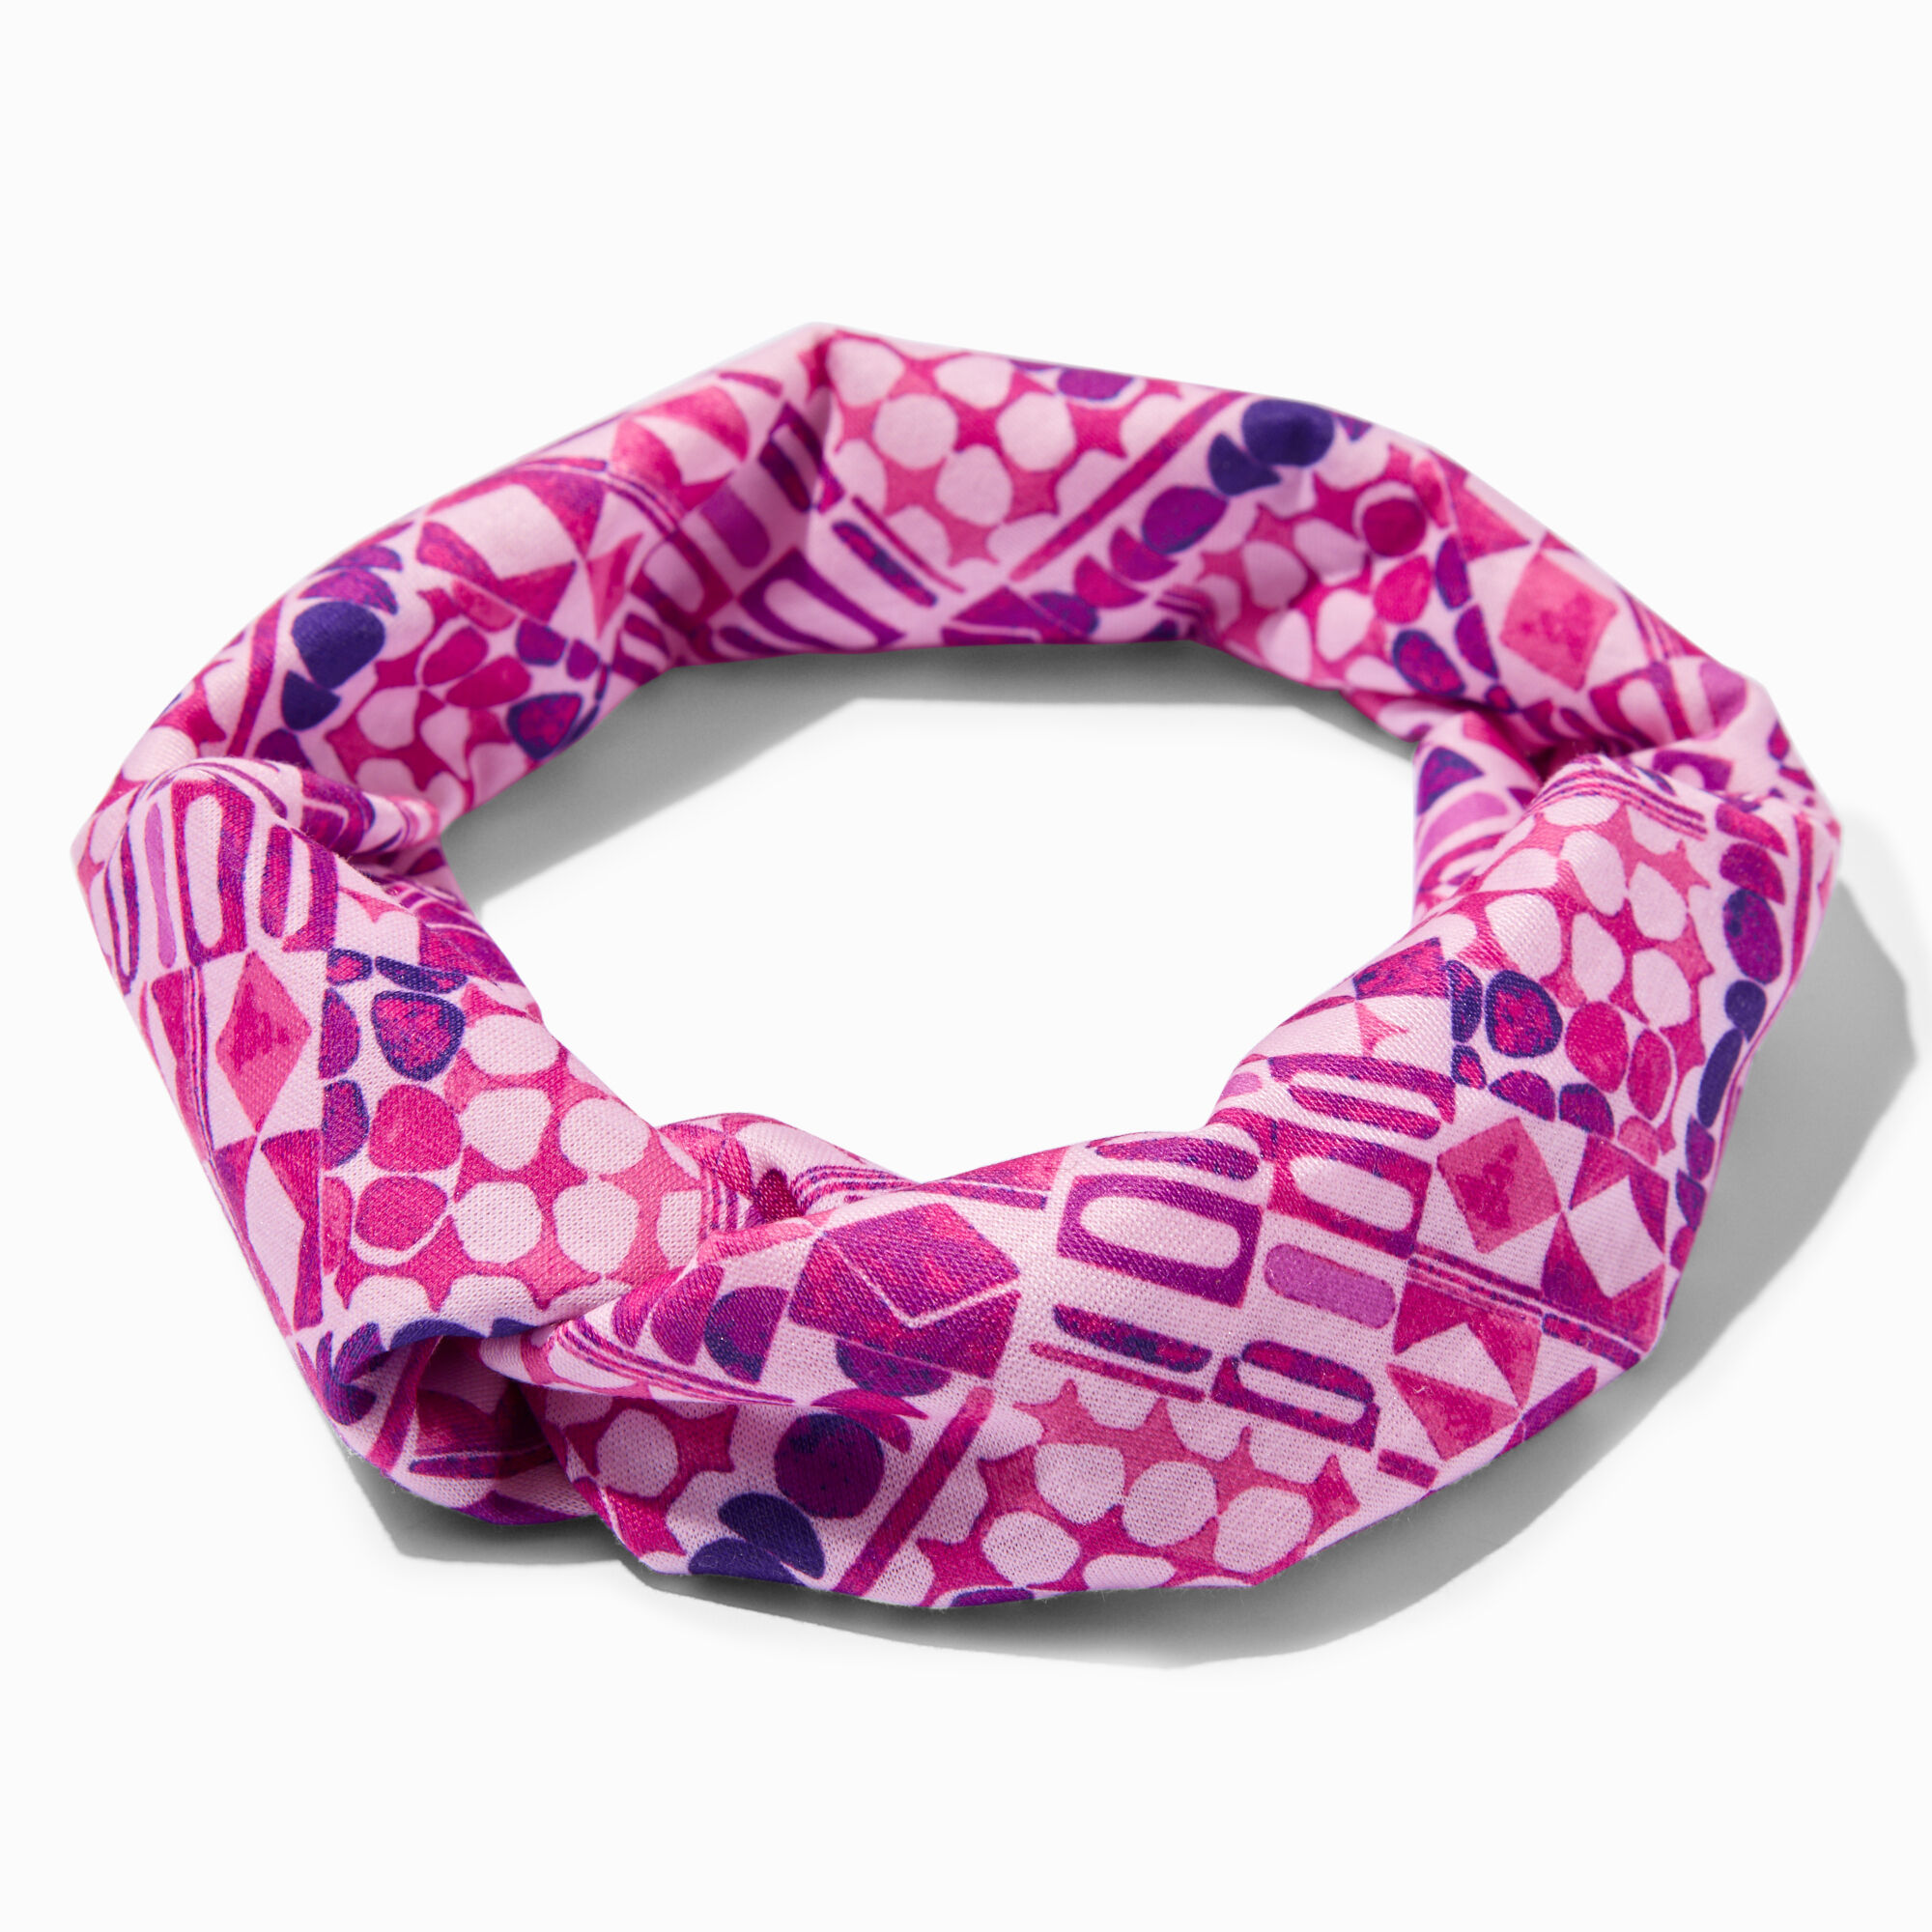 View Claires Geometric Print Twisted Headwrap Pink information